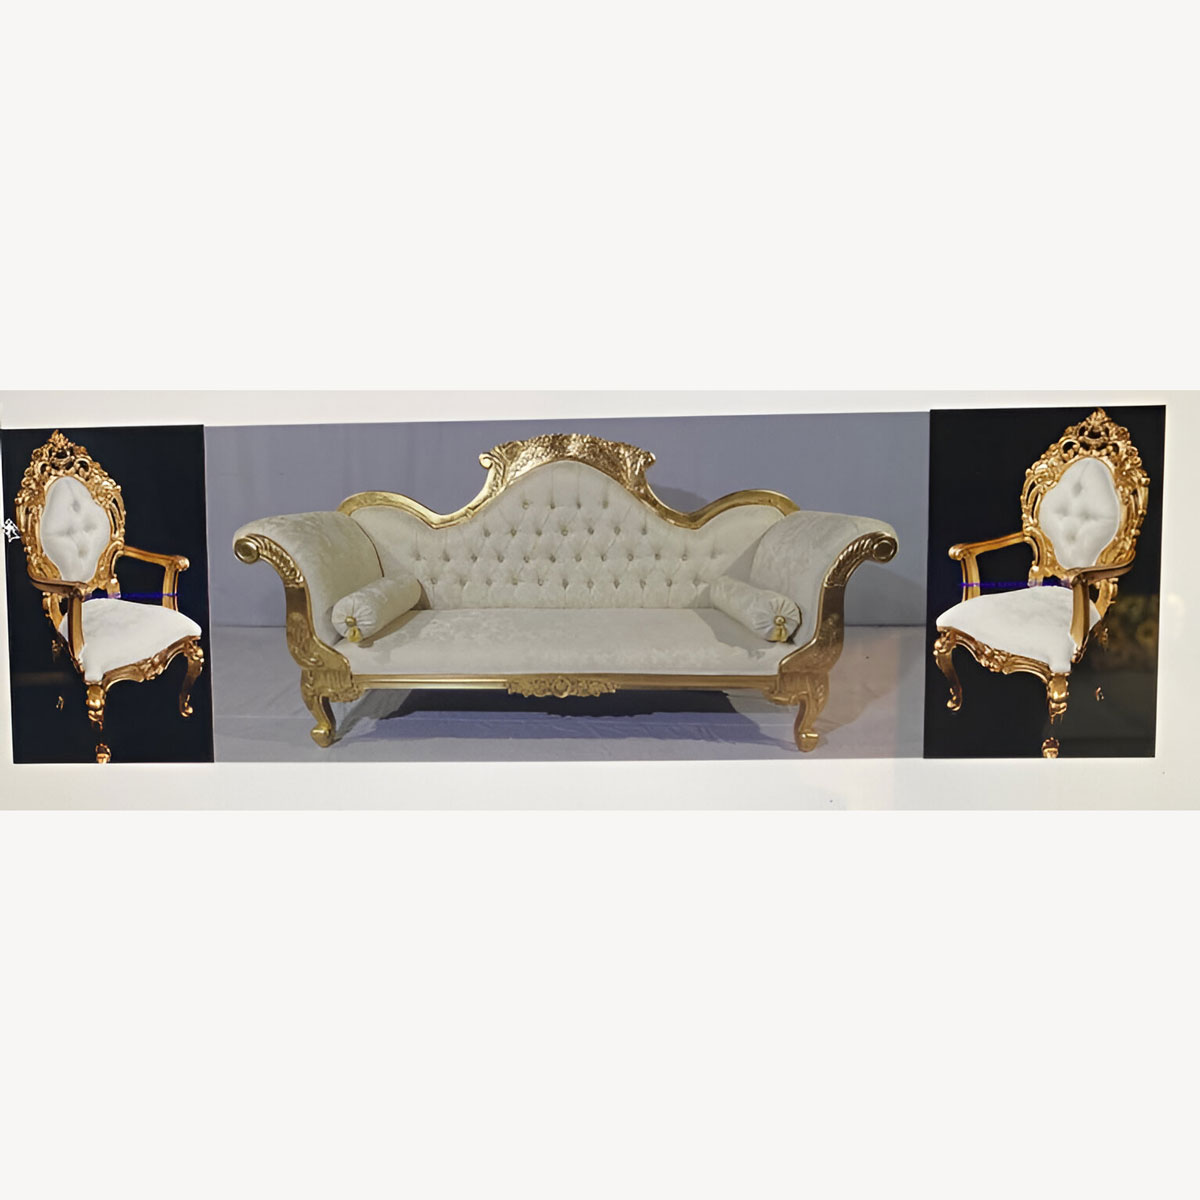 Large Mayfair Wedding Sofa In Gold Leaf Frame 3 Seater With Ivory Cream Damask With Two Matching Palace Throne Chairs Crystal Buttoning 1 - Hampshire Barn Interiors - Large Mayfair Wedding Sofa In Gold Leaf Frame 3 Seater With Ivory Cream Damask With Two Matching Palace Throne Chairs Crystal Buttoning -